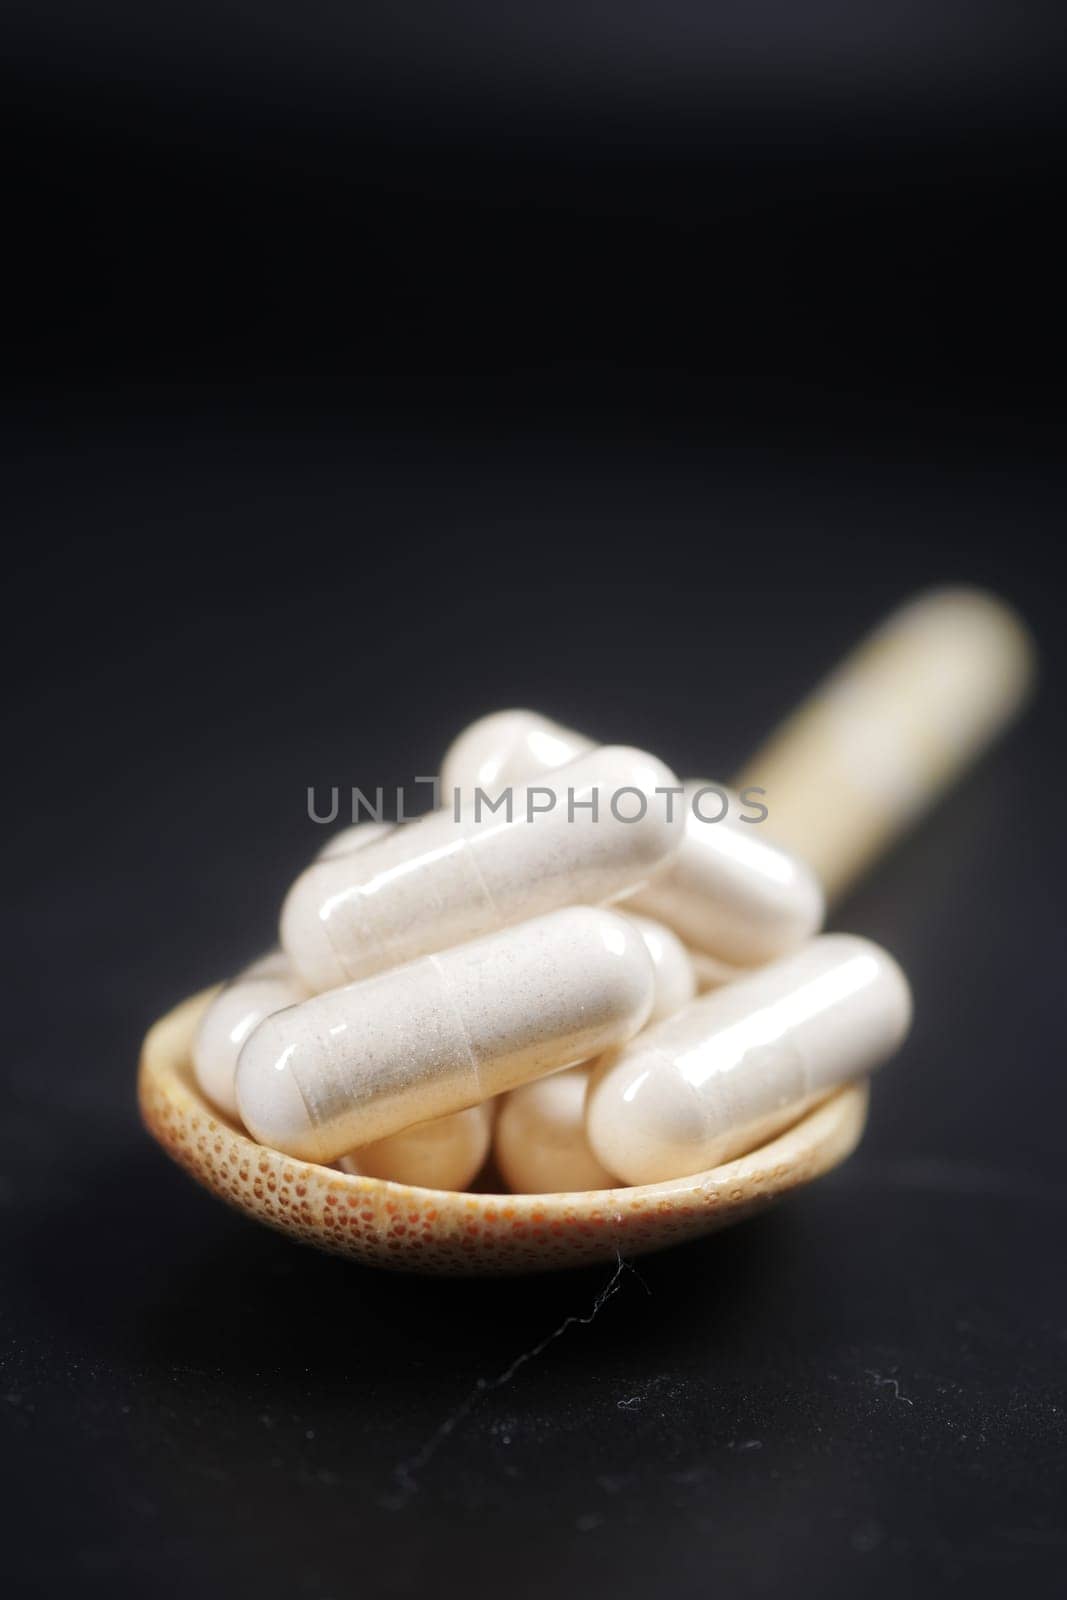 herbal medicine capsules on a spoon on black background by towfiq007